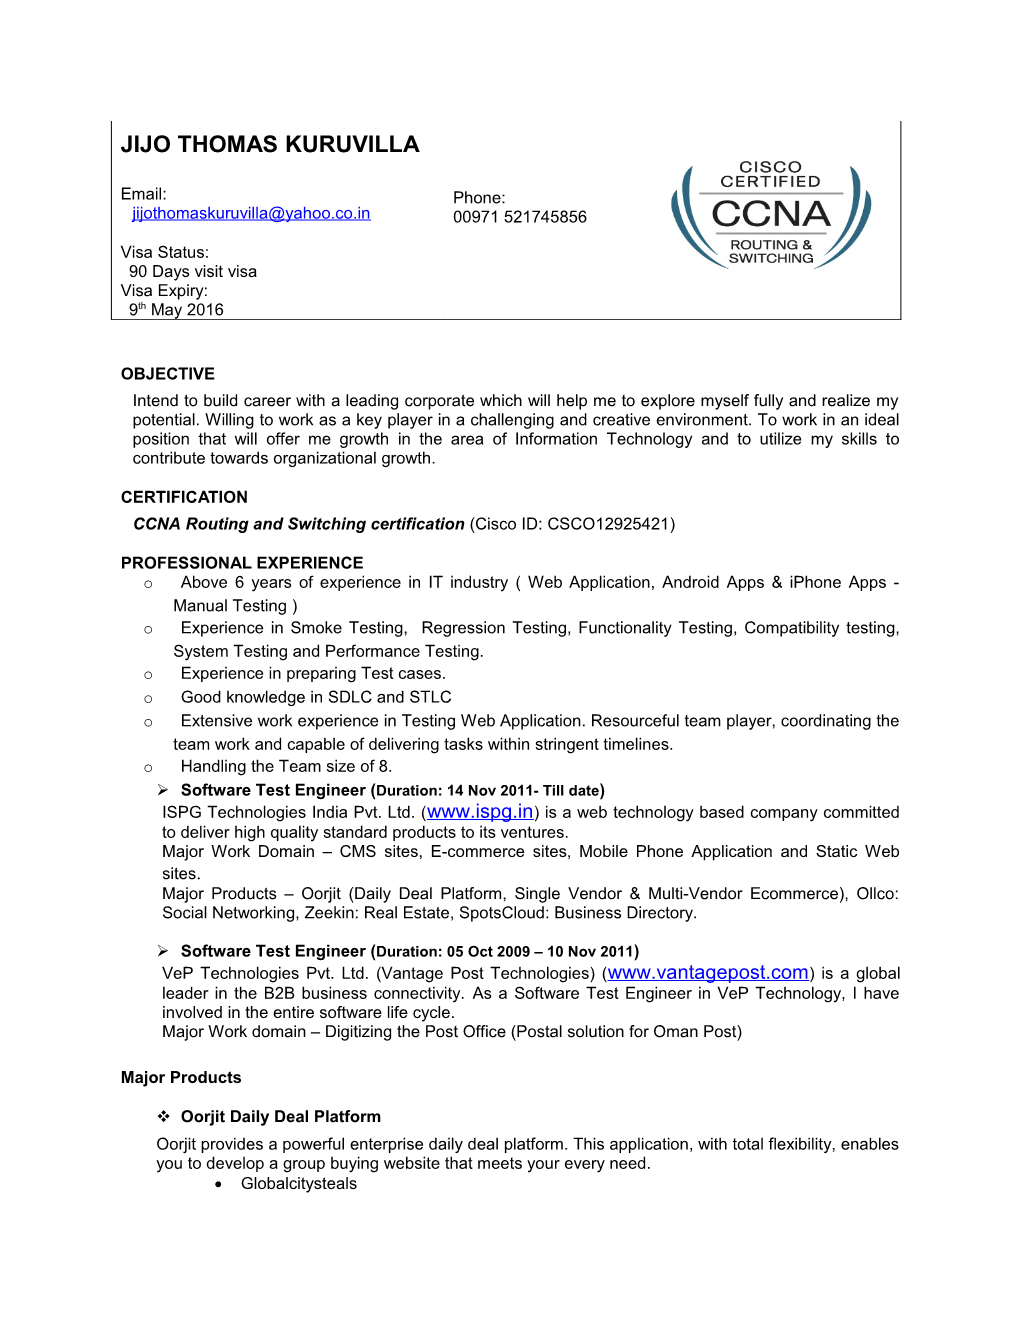 CCNA Routing and Switching Certification (Cisco ID: CSCO12925421)